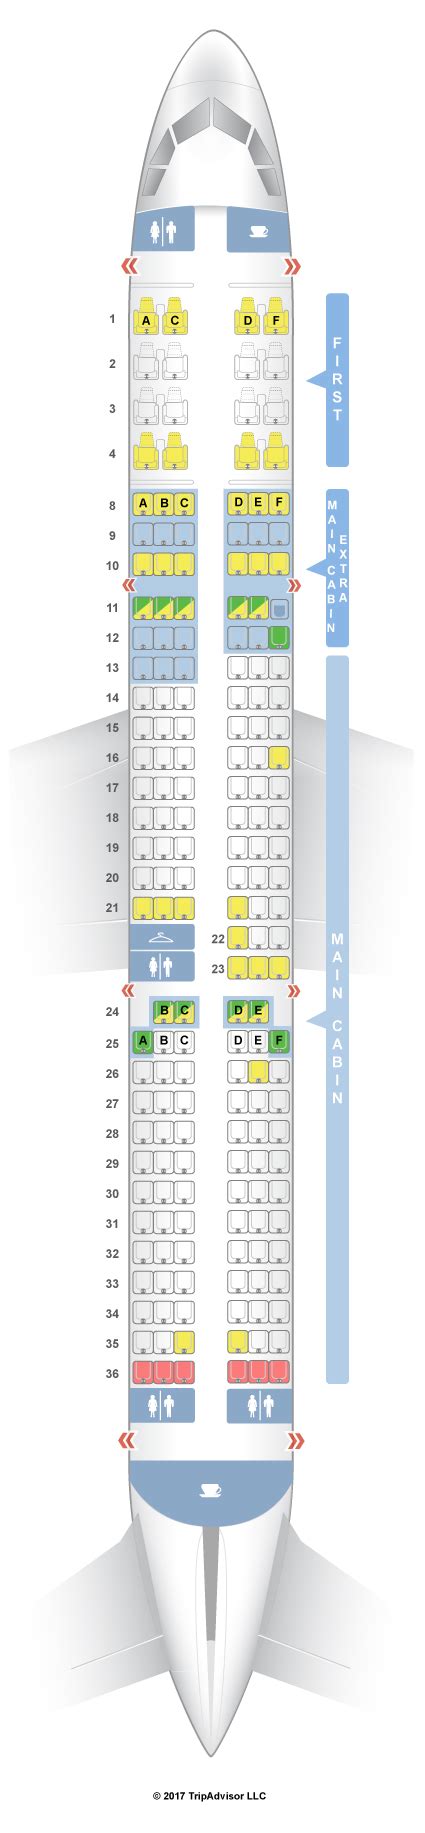 Submitted by SeatGuru User on 2015/04/08 for Seat Not that Inpres . Service was always superme for asiana, however there was a oil maintance service which delayed 1 hr n half for a 50 mins flight. ... Airbus A321-100 (321) Standard Travel (Rows 1-35) View map: SeatGuru was created to help travelers choose ...